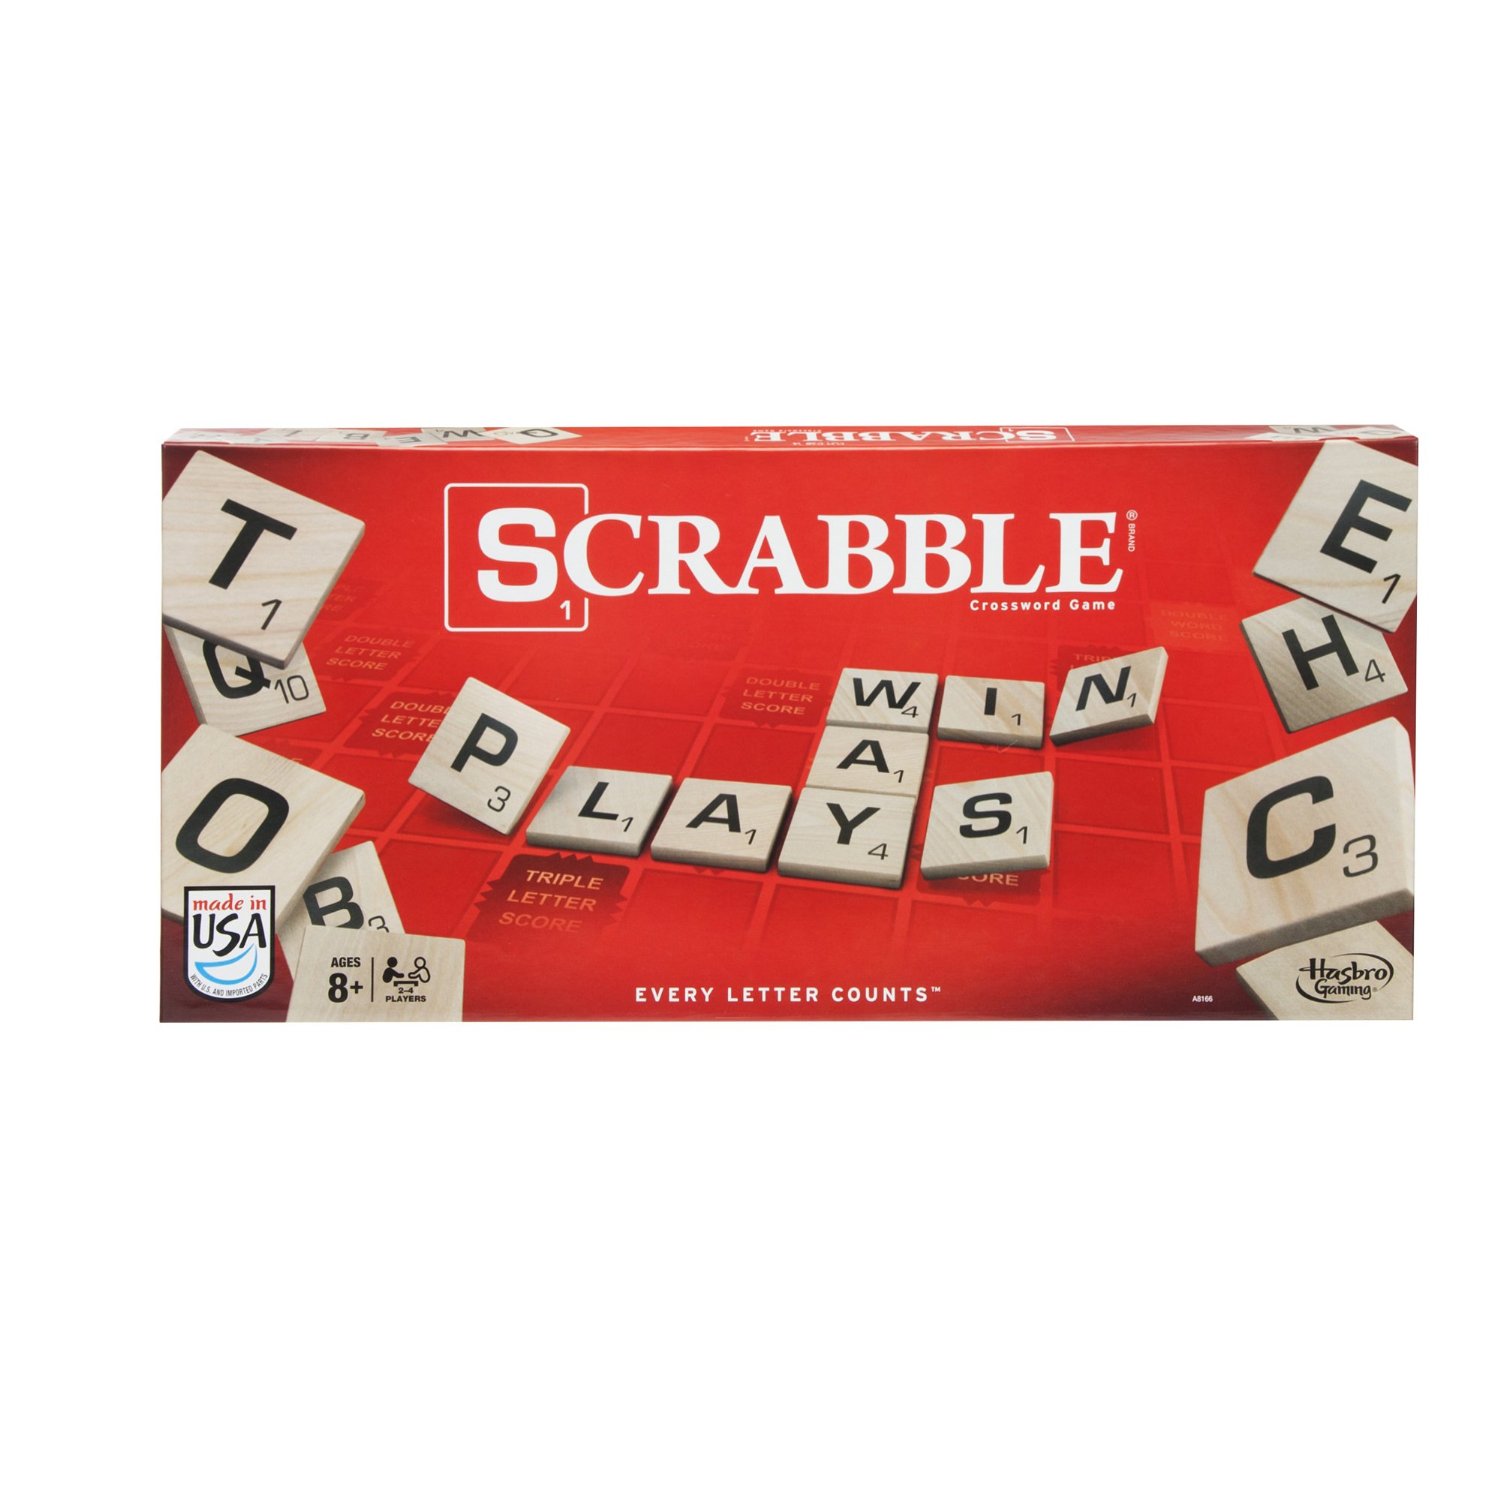 How the Cipher of Edgar Allan Poe’s The Gold Bug inspired Scrabble